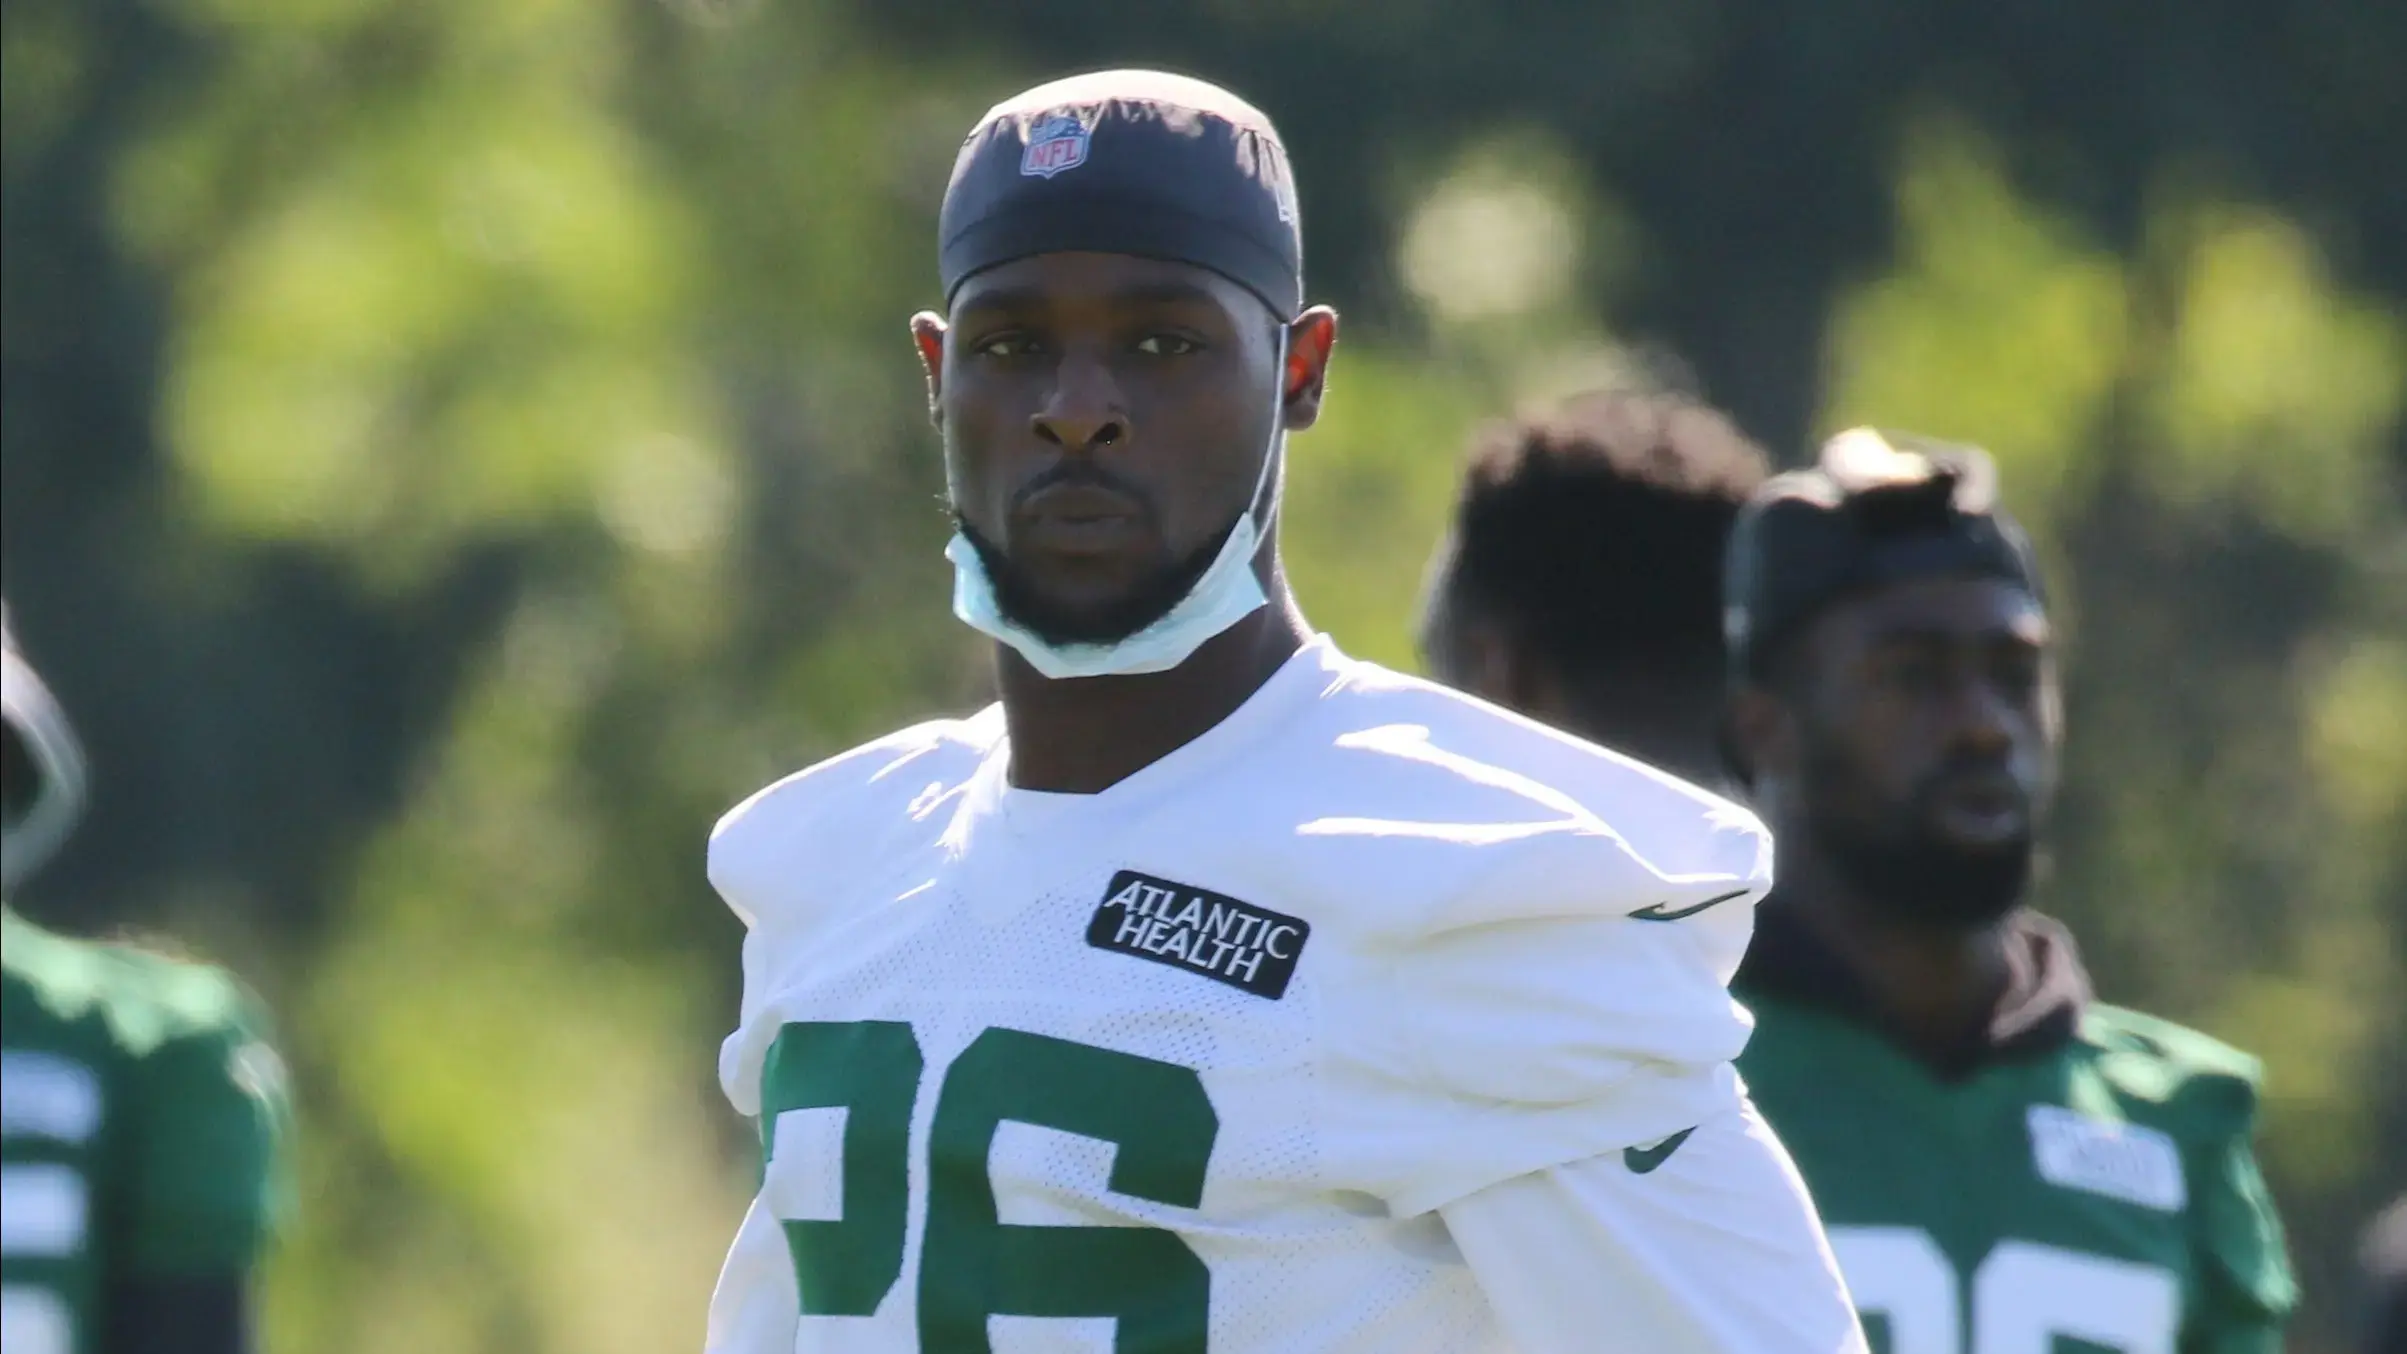 Jets RB Le'Veon Bell at training camp / USA TODAY